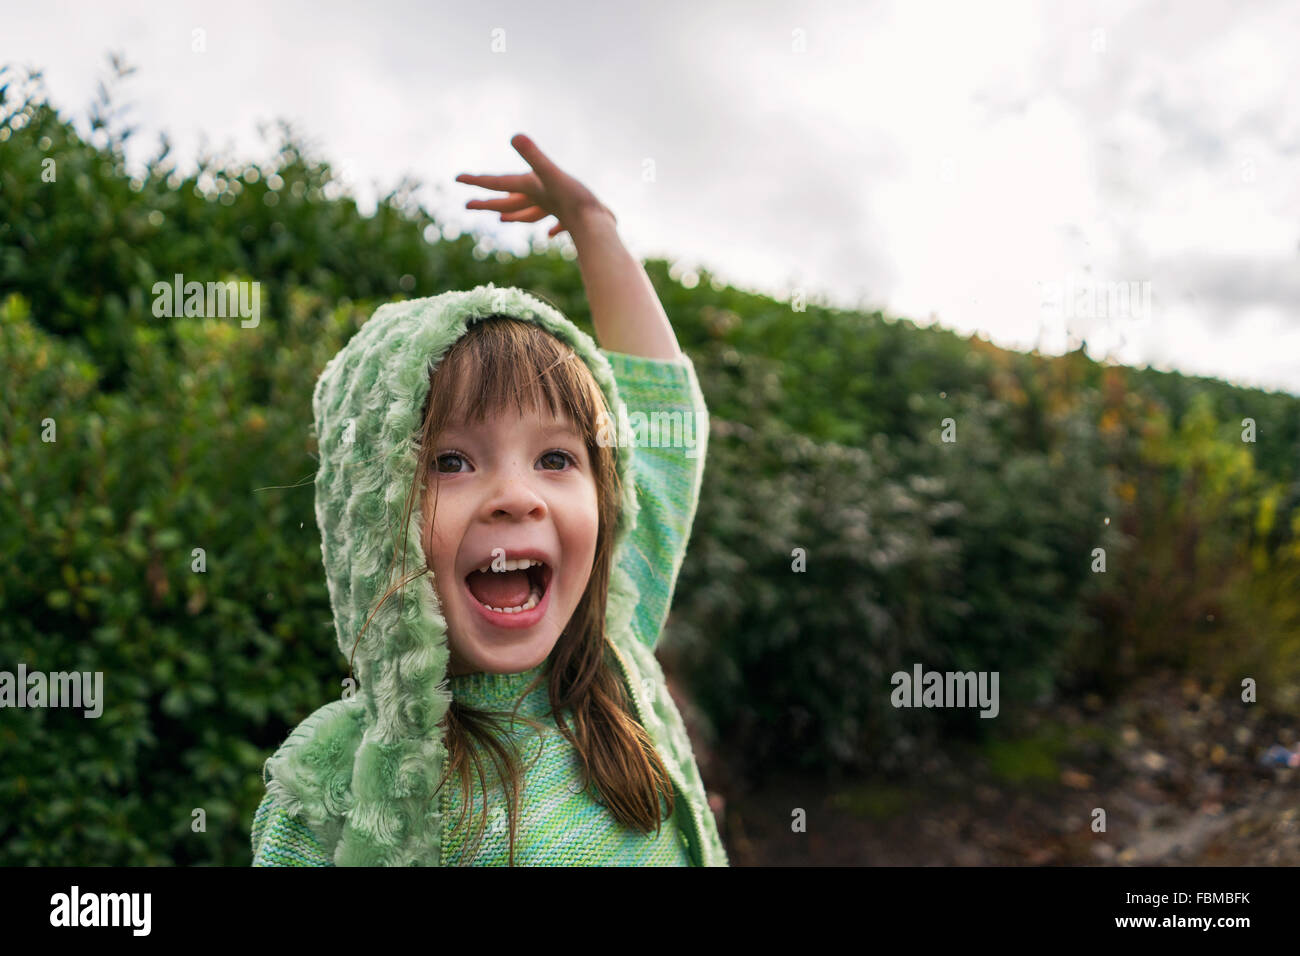 Excited girl with raised arm in the rain Stock Photo